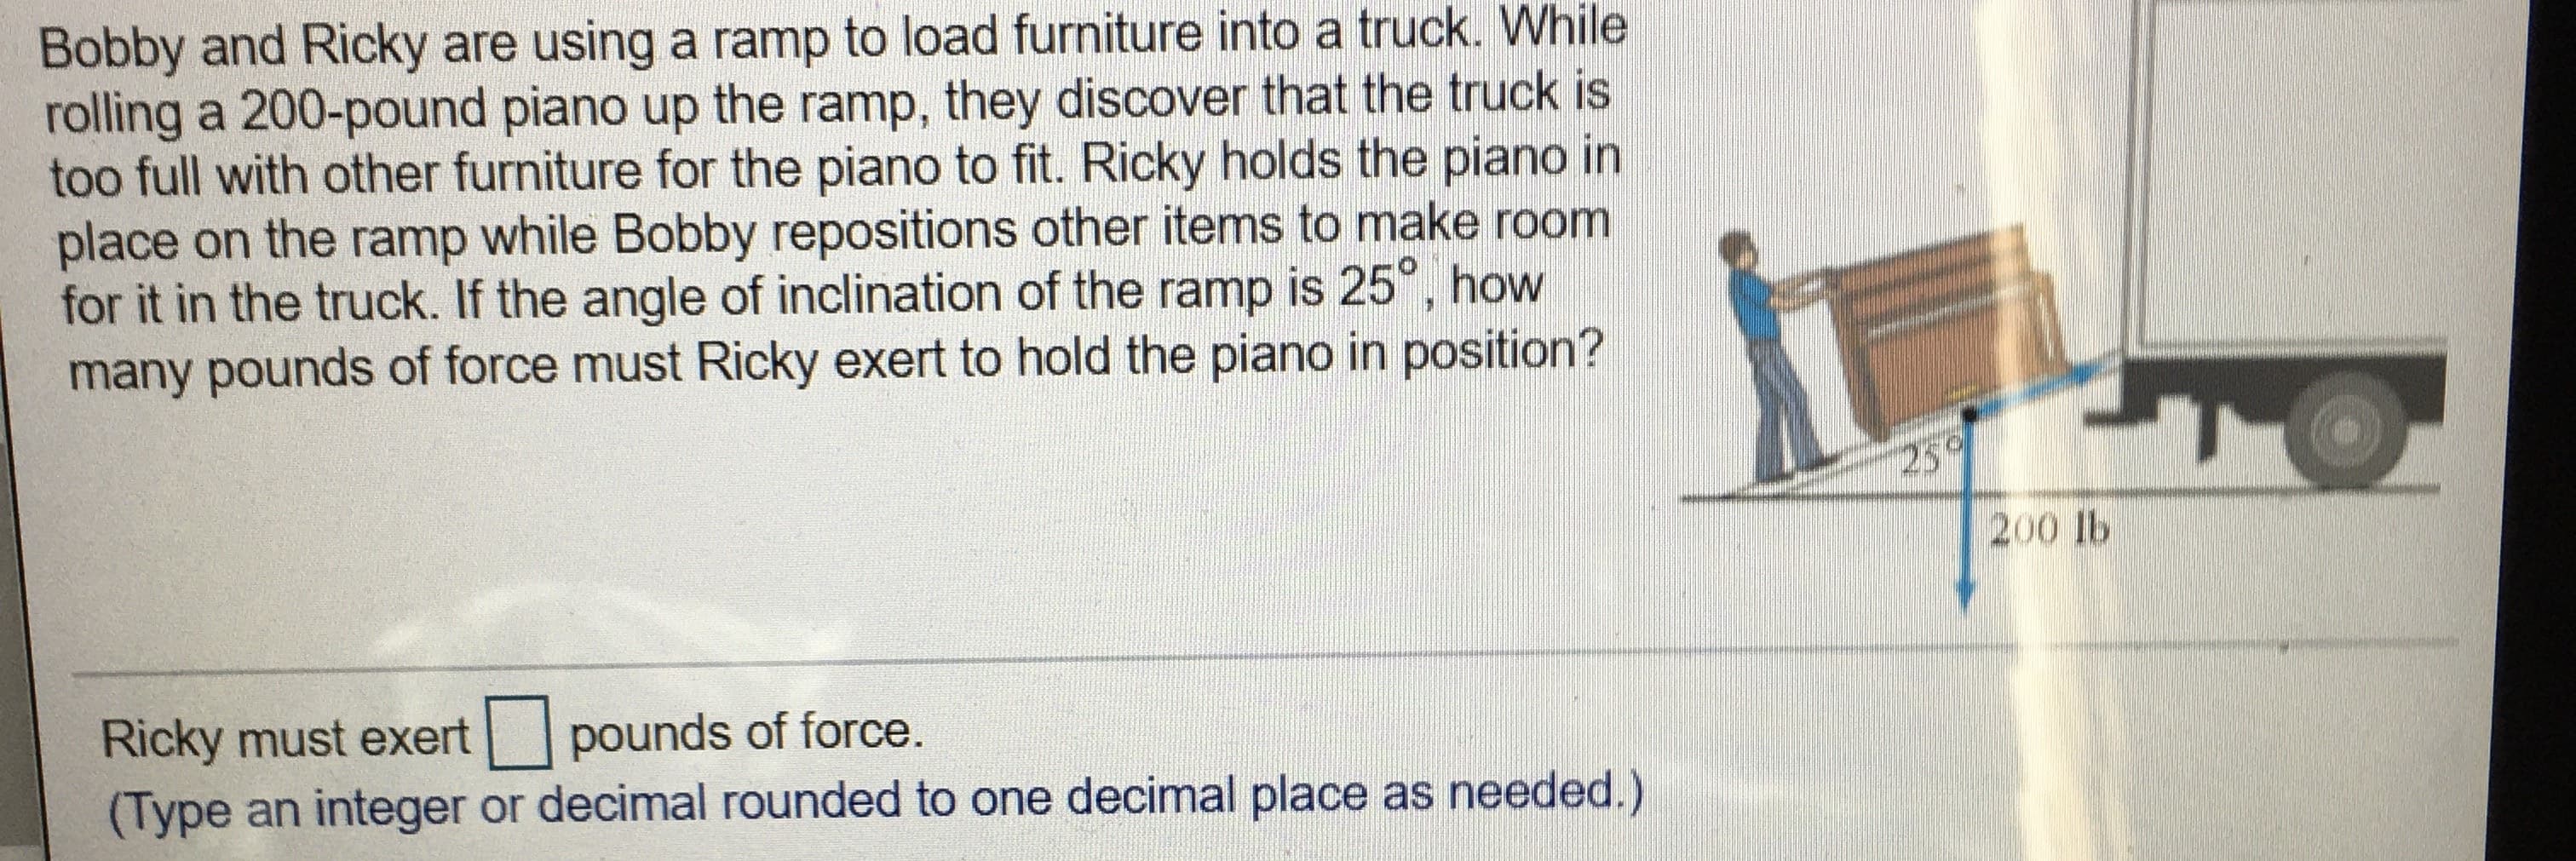 Bobby and Ricky are using a ramp to load furniture into a truck. While
rolling a 200-pound piano up the ramp, they discover that the truck is
too full with other furniture for the piano to fit. Ricky holds the piano in
place on the ramp while Bobby repositions other items to make room
for it in the truck. If the angle of inclination of the ramp is 25°, how
many pounds of force must Ricky exert to hold the piano in position?
